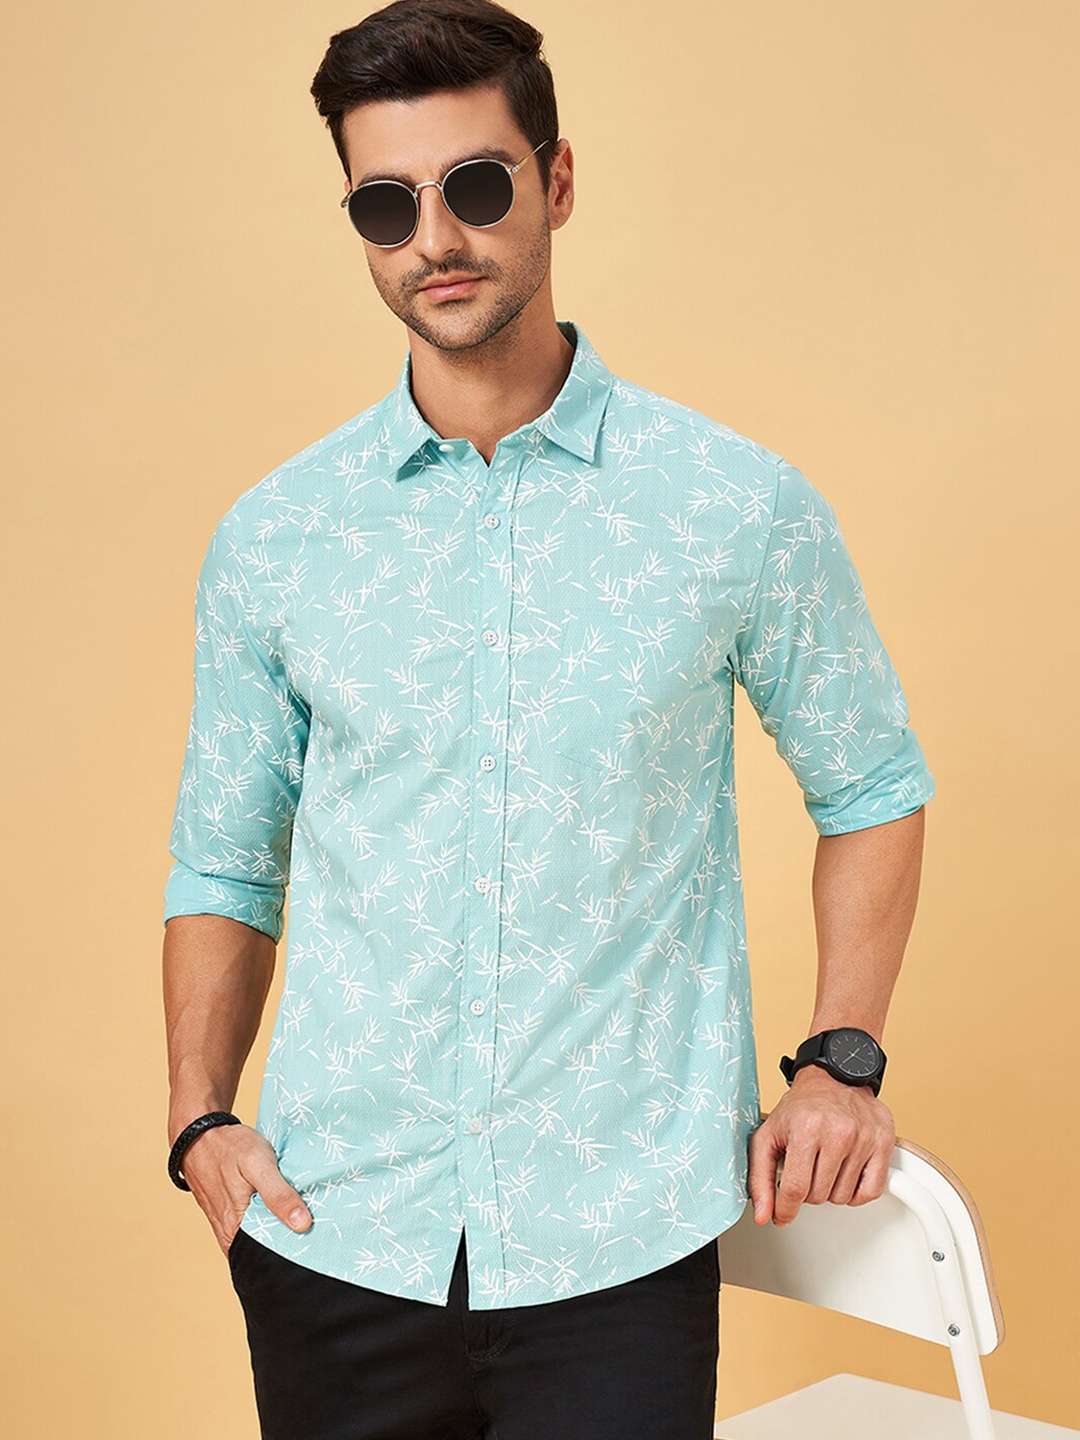 

BYFORD by Pantaloons Slim Fit Floral Printed Cotton Casual Shirt, Green